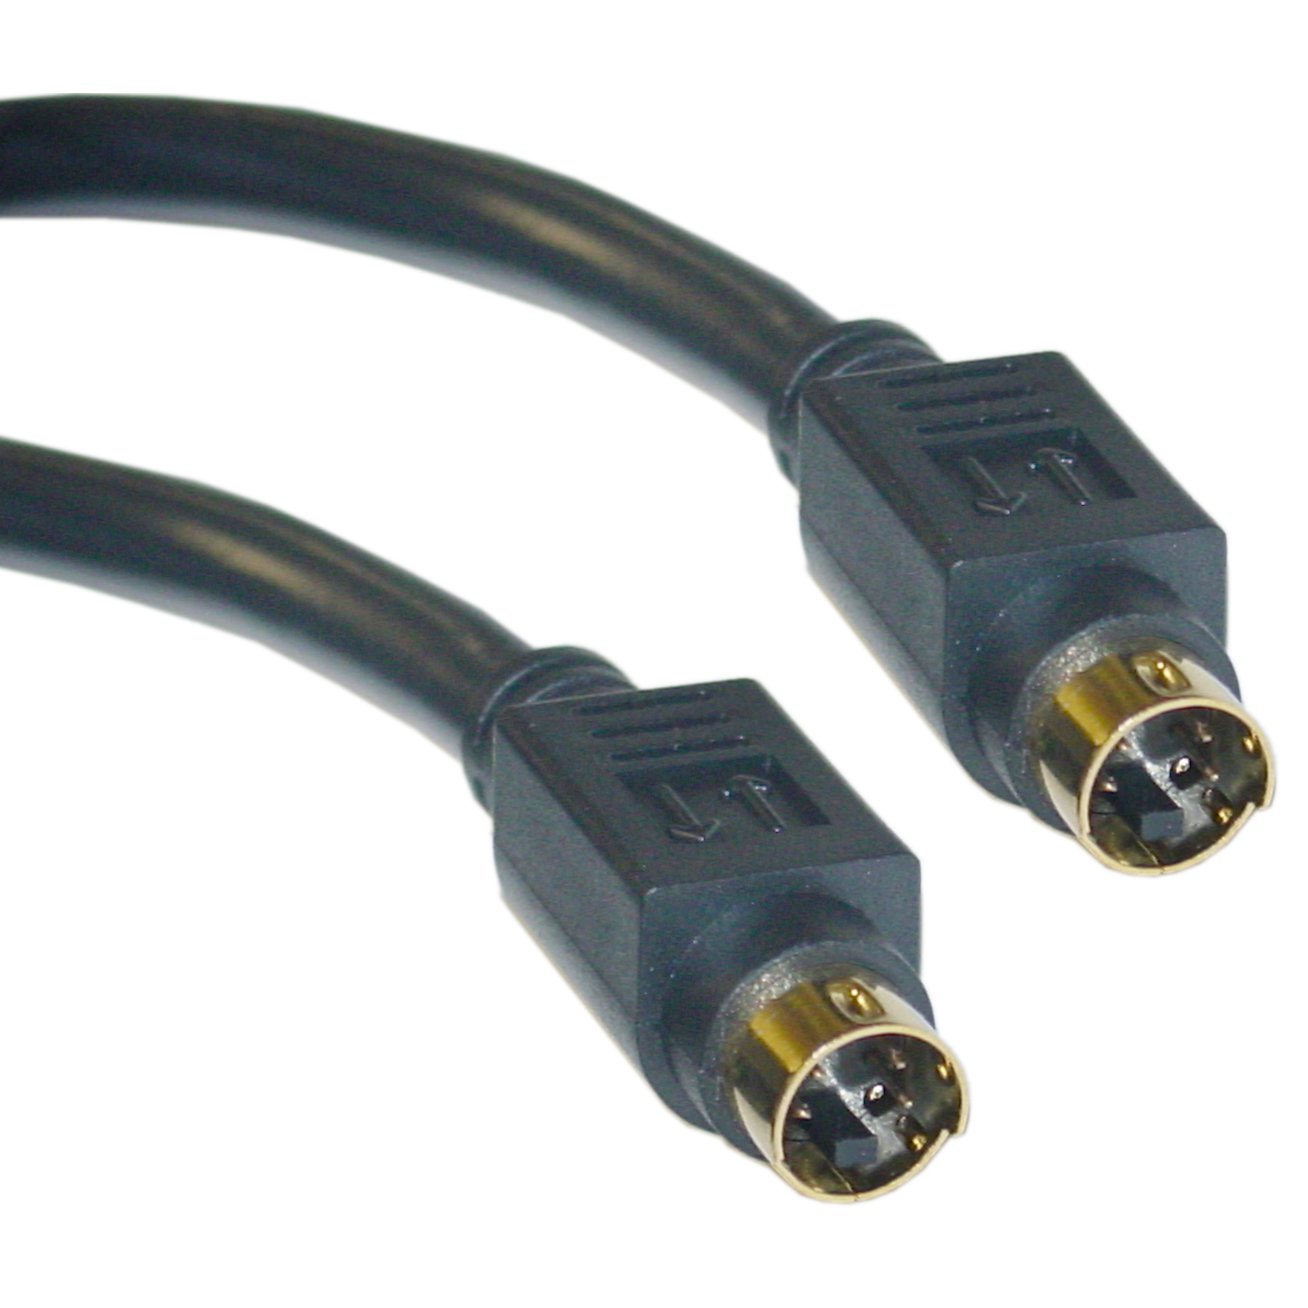 50FT S-Video Cable, MiniDin4 Male, Gold-plated connector  10S2-01150G